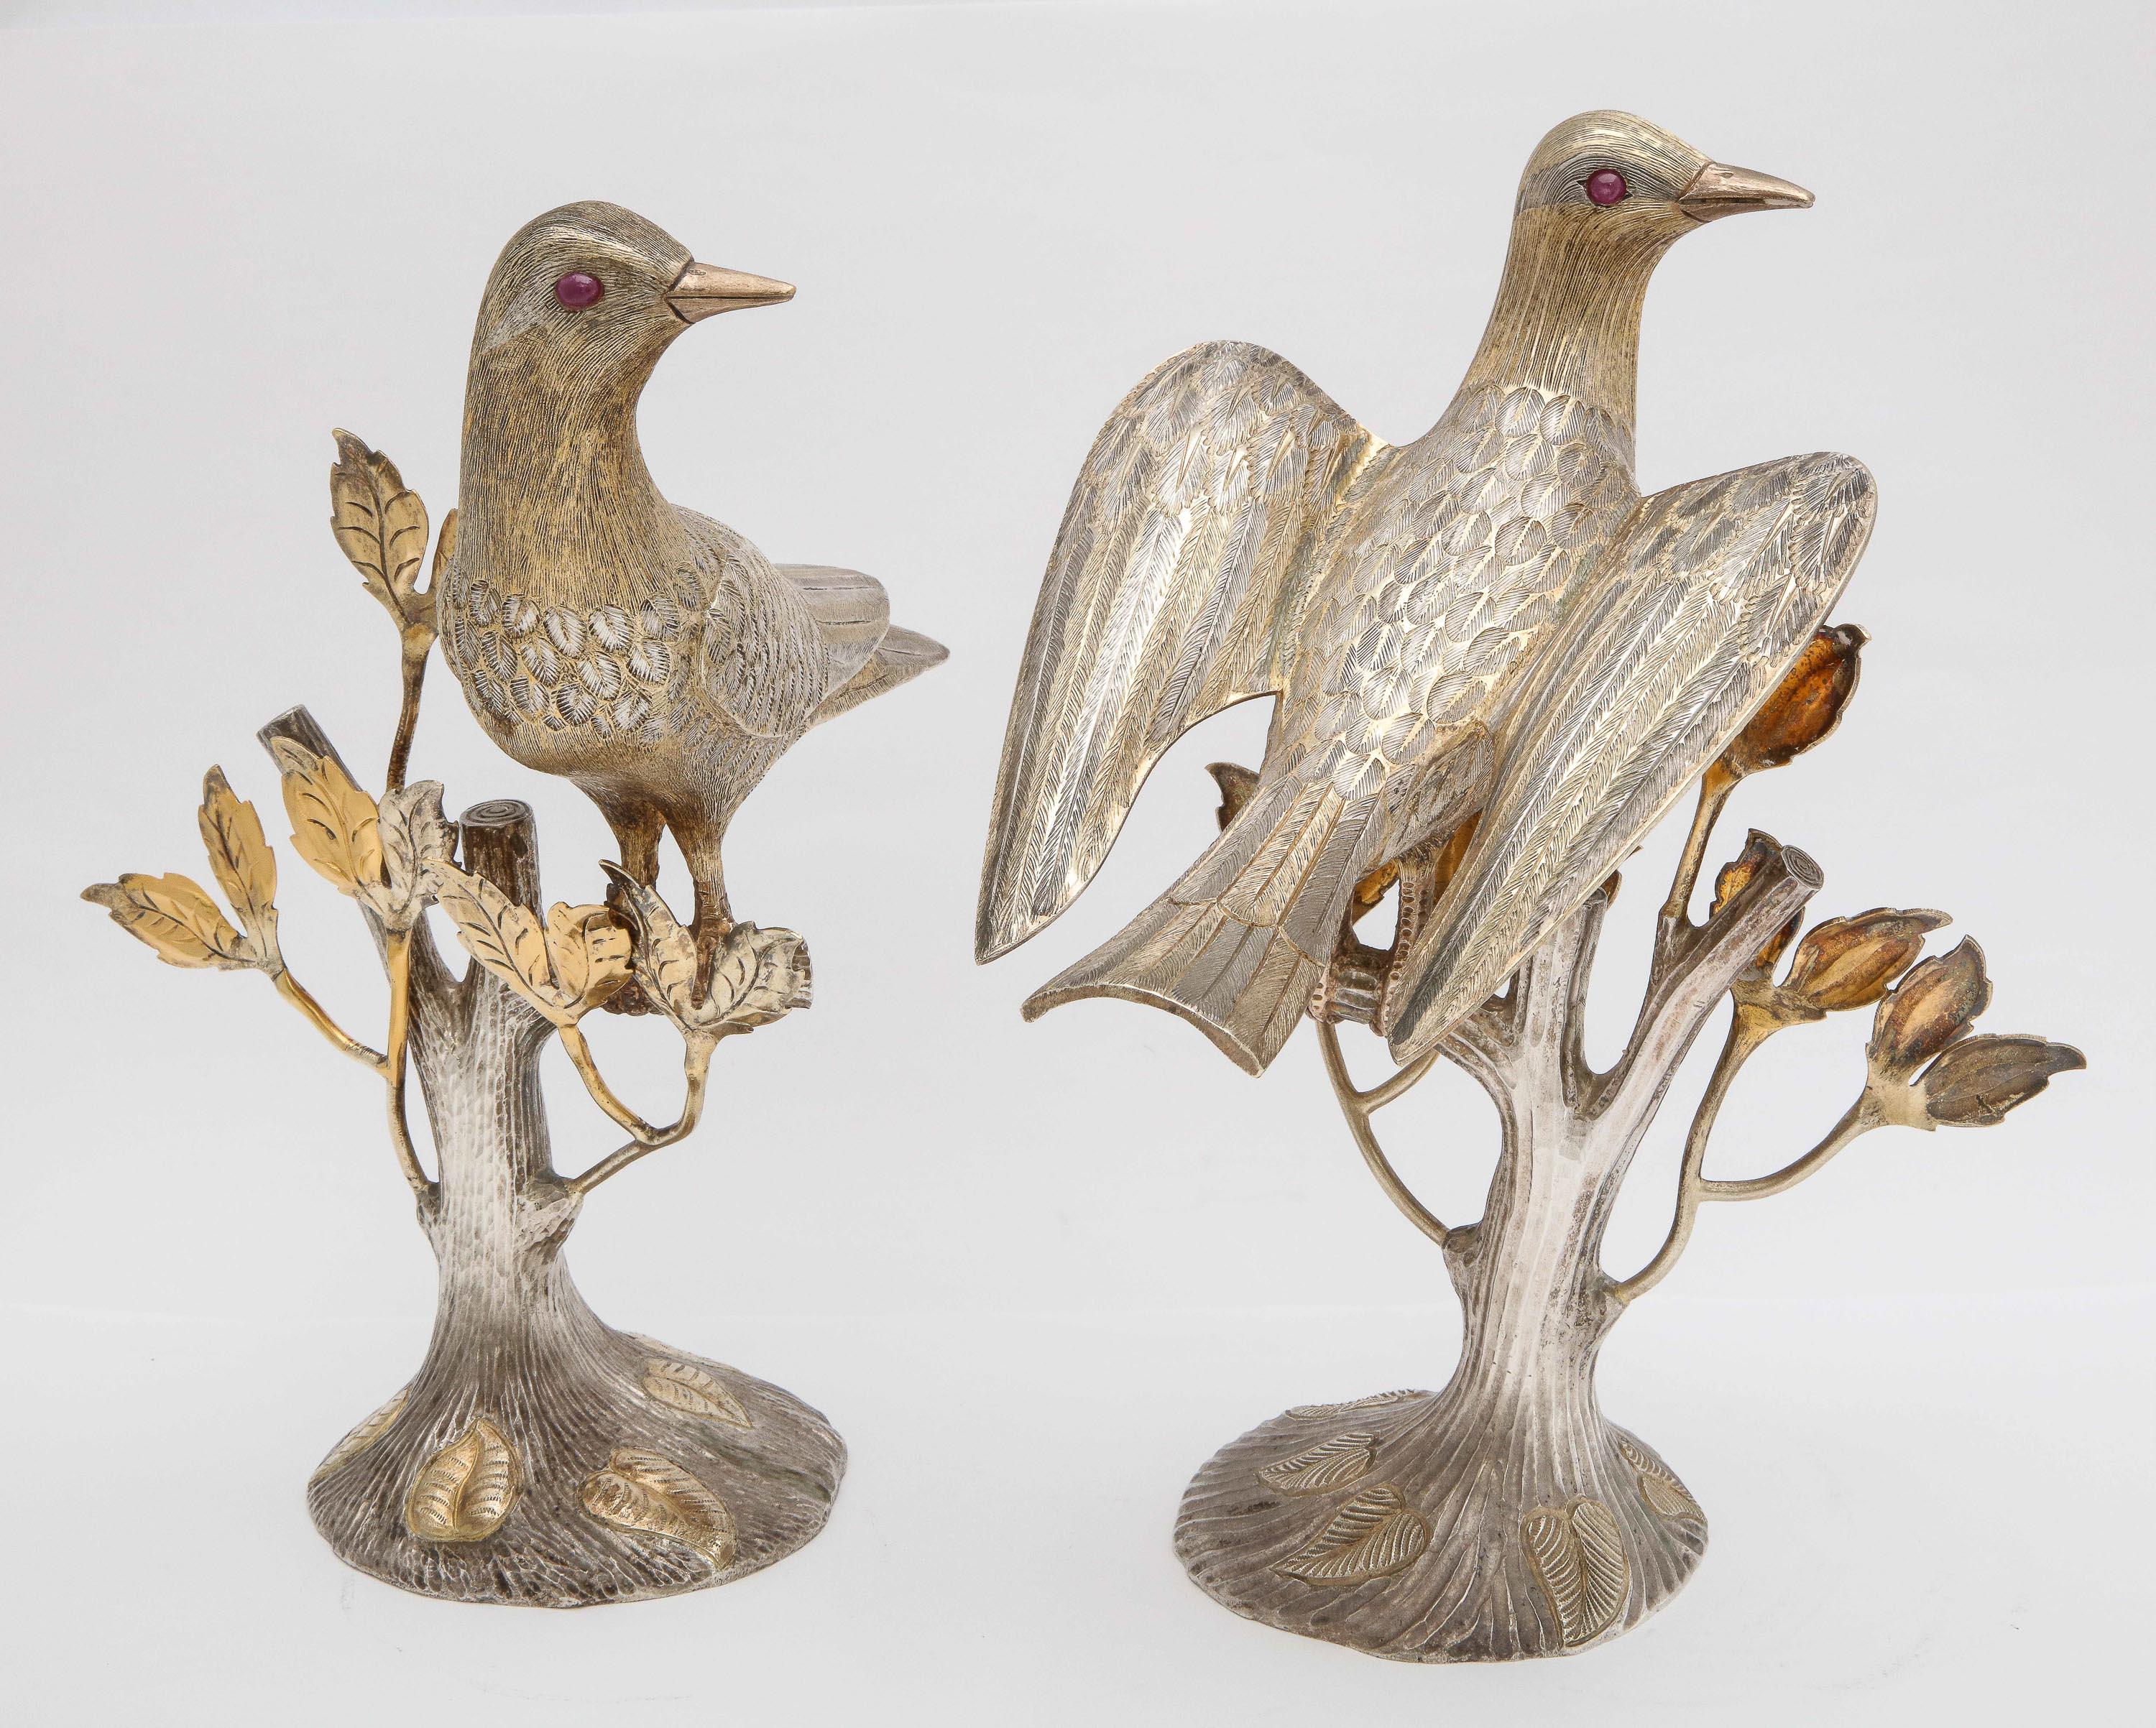 Midcentury decorative pair of sterling silver table birds with real ruby eyes, Mexico, circa 1950s, Tane - maker. Each bird is perched on a tree branch. Both sterling silver figures are parcel-gilt. The measurements are as follows: The bird with its